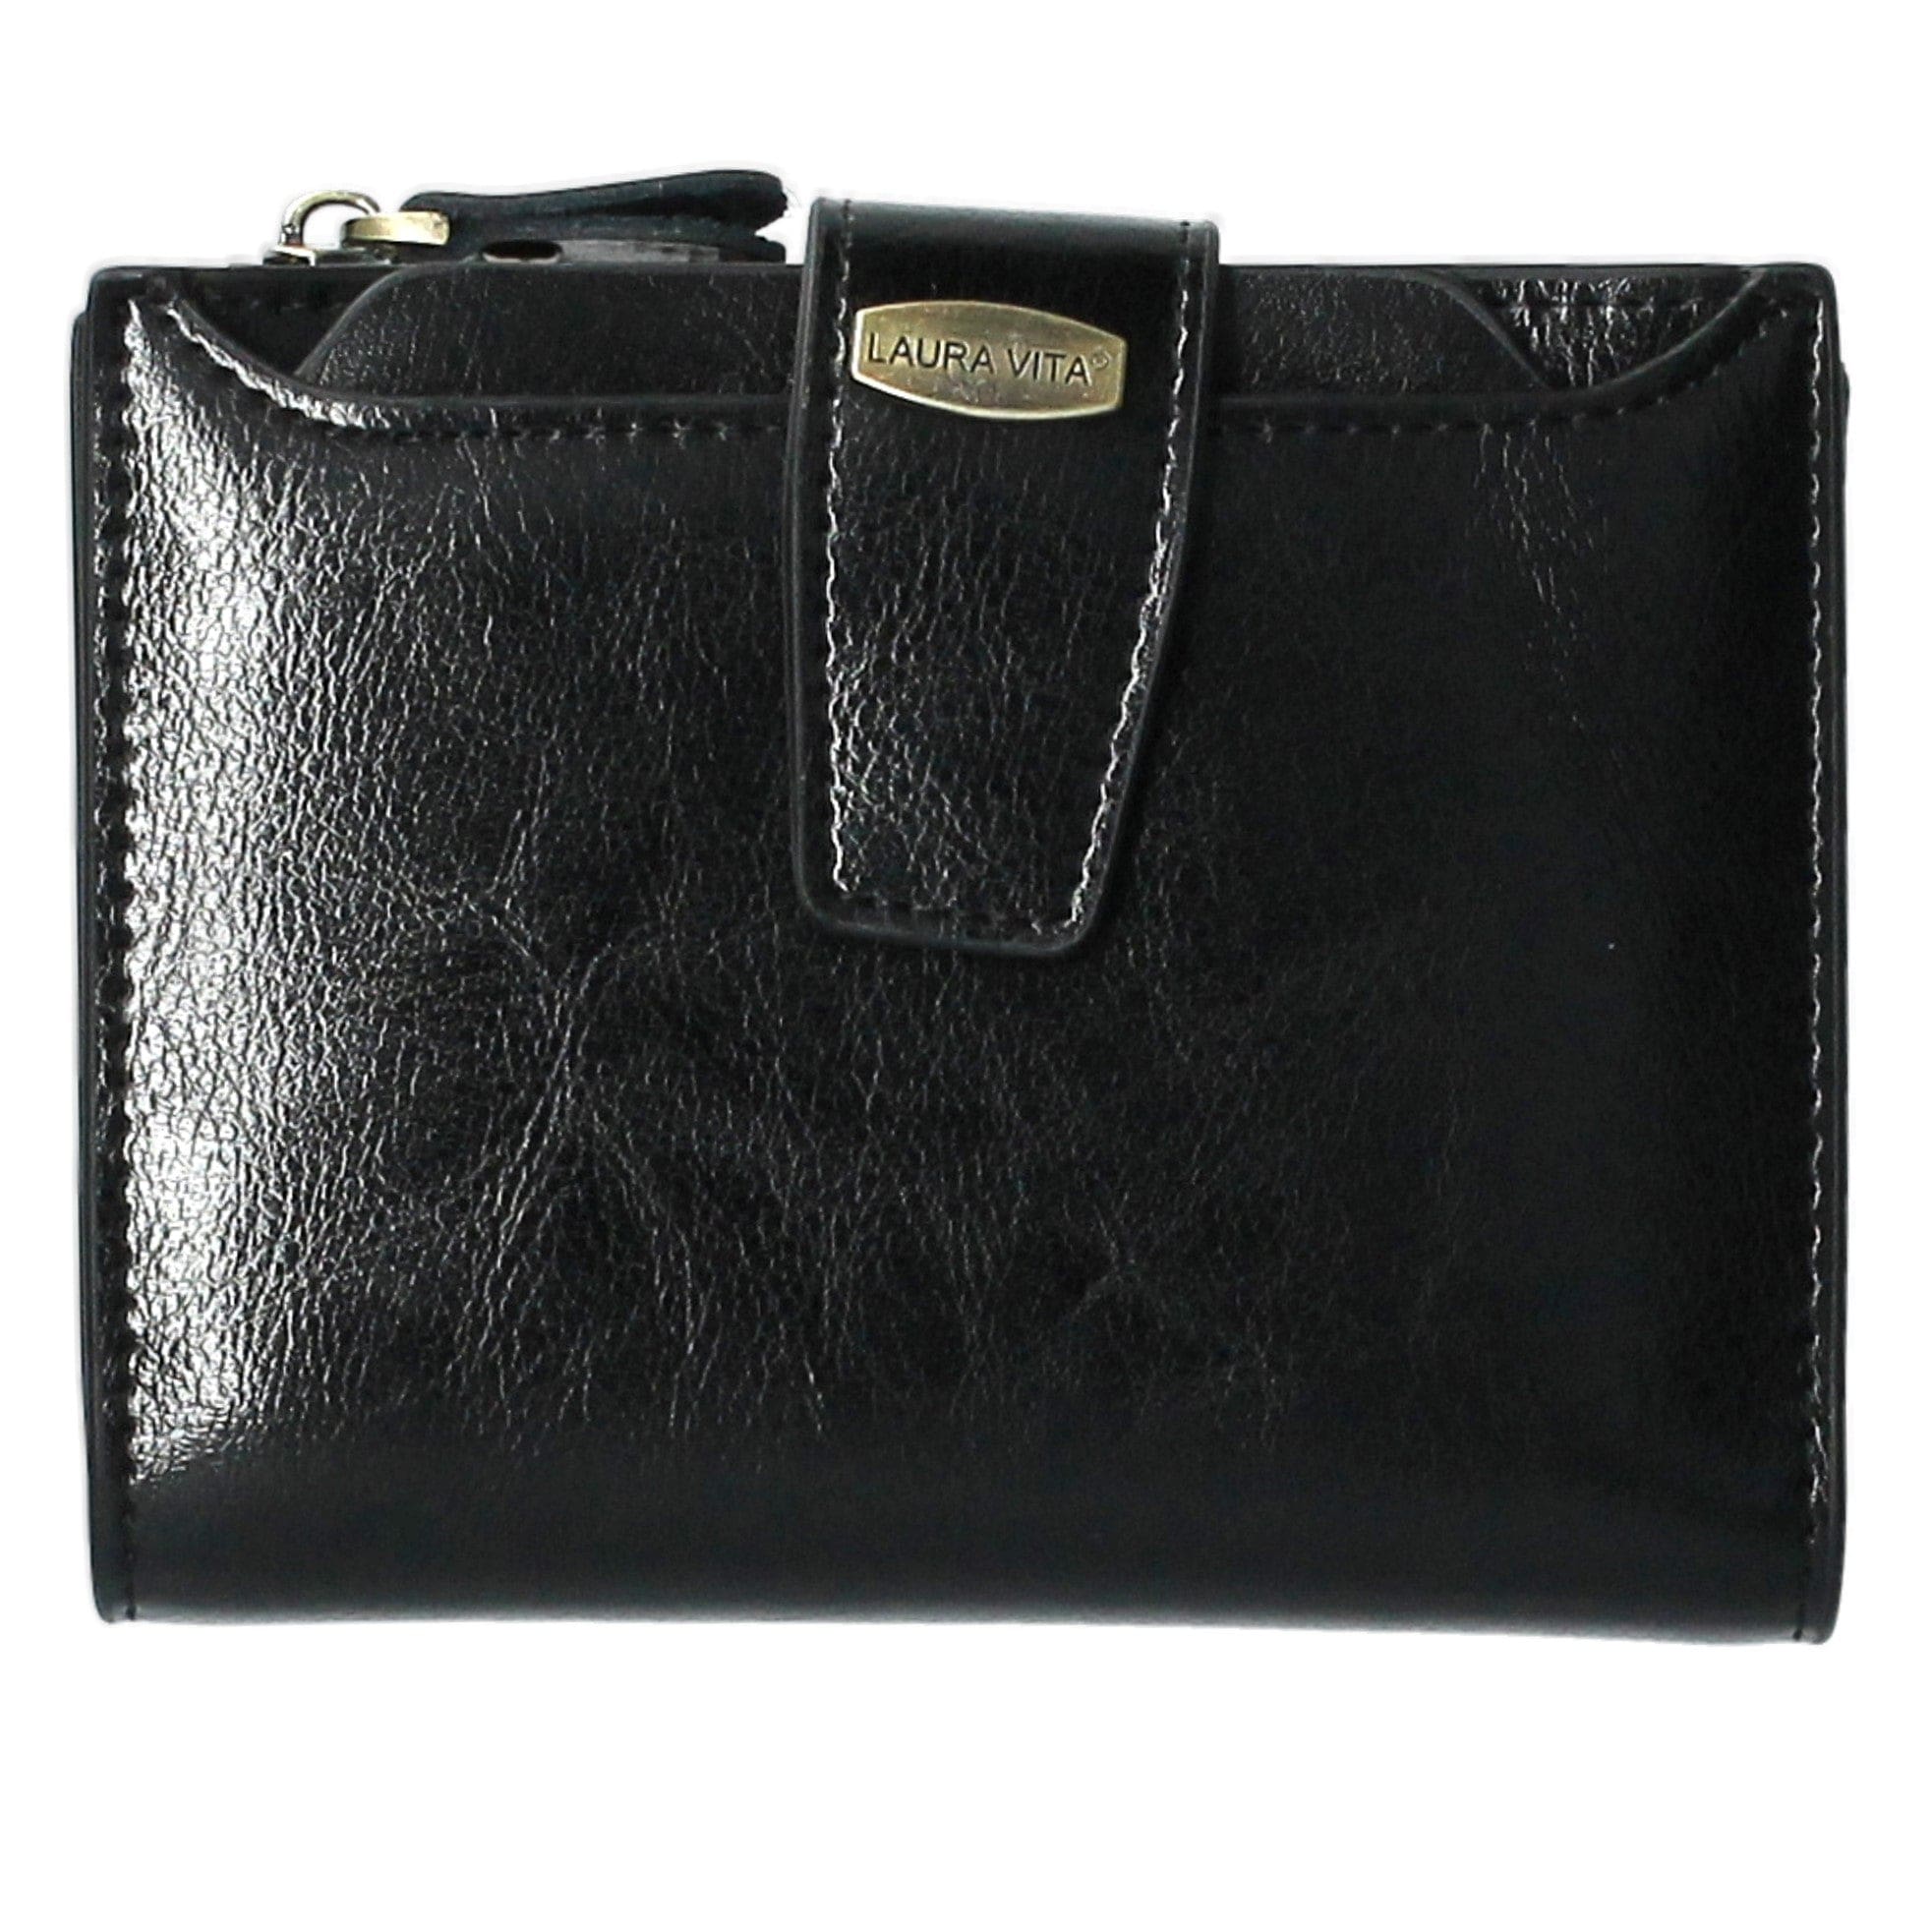 Felicia wallet - Black - Small leather goods